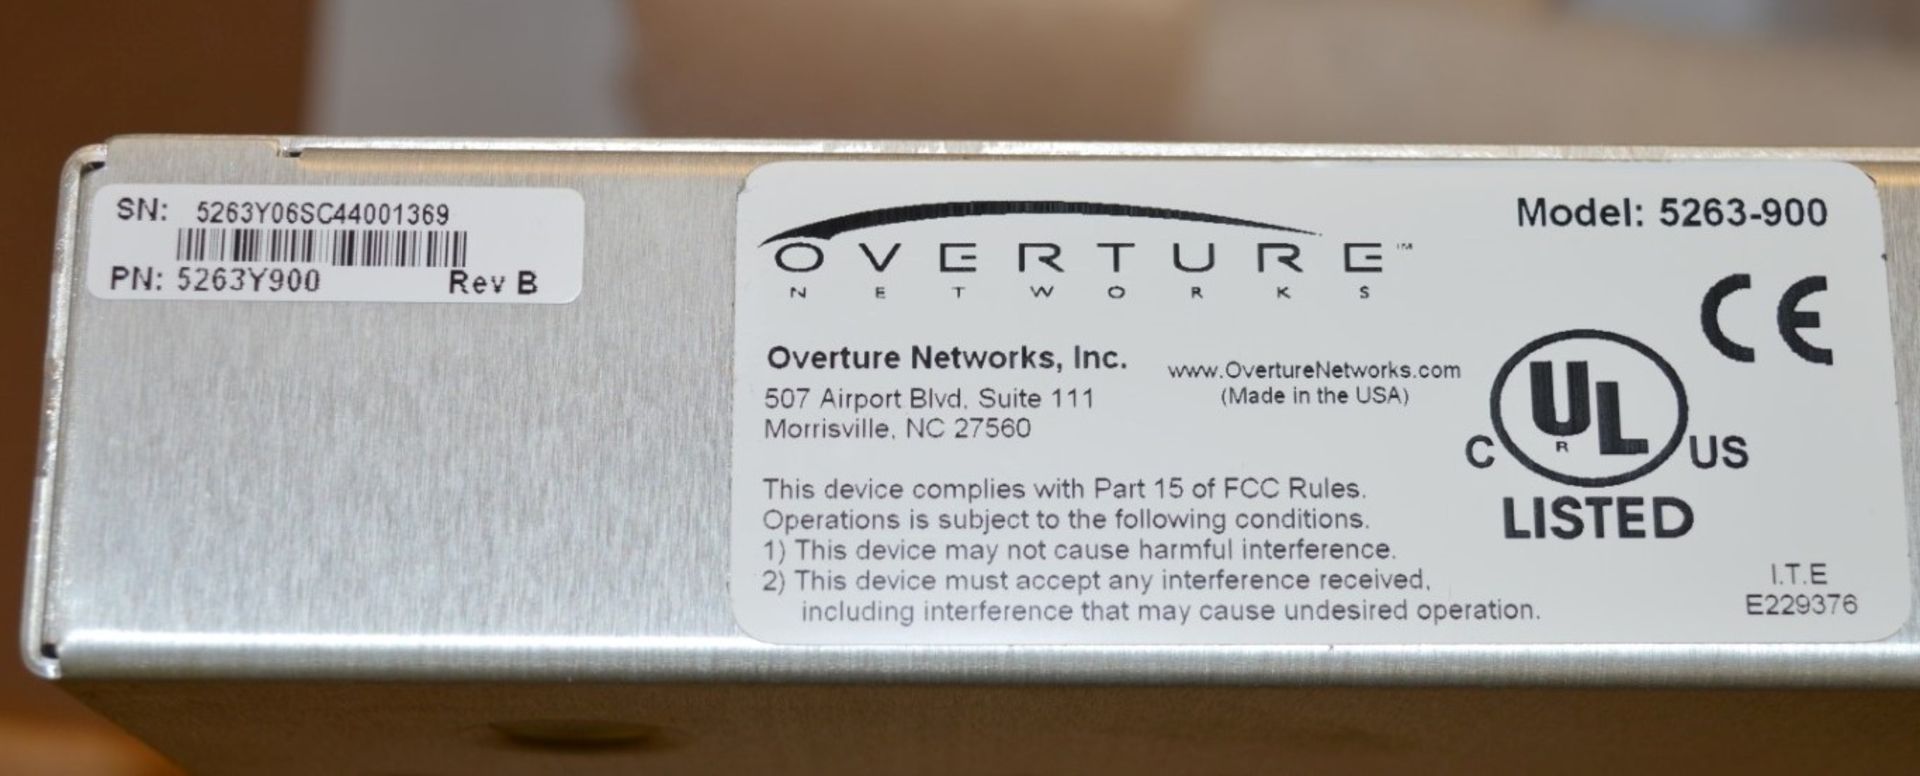 1 x Overture Networks ISG 180 Carrier Ethernet Over T1/E1 Edge - Model 5262-930A - Brand New and - Image 3 of 11